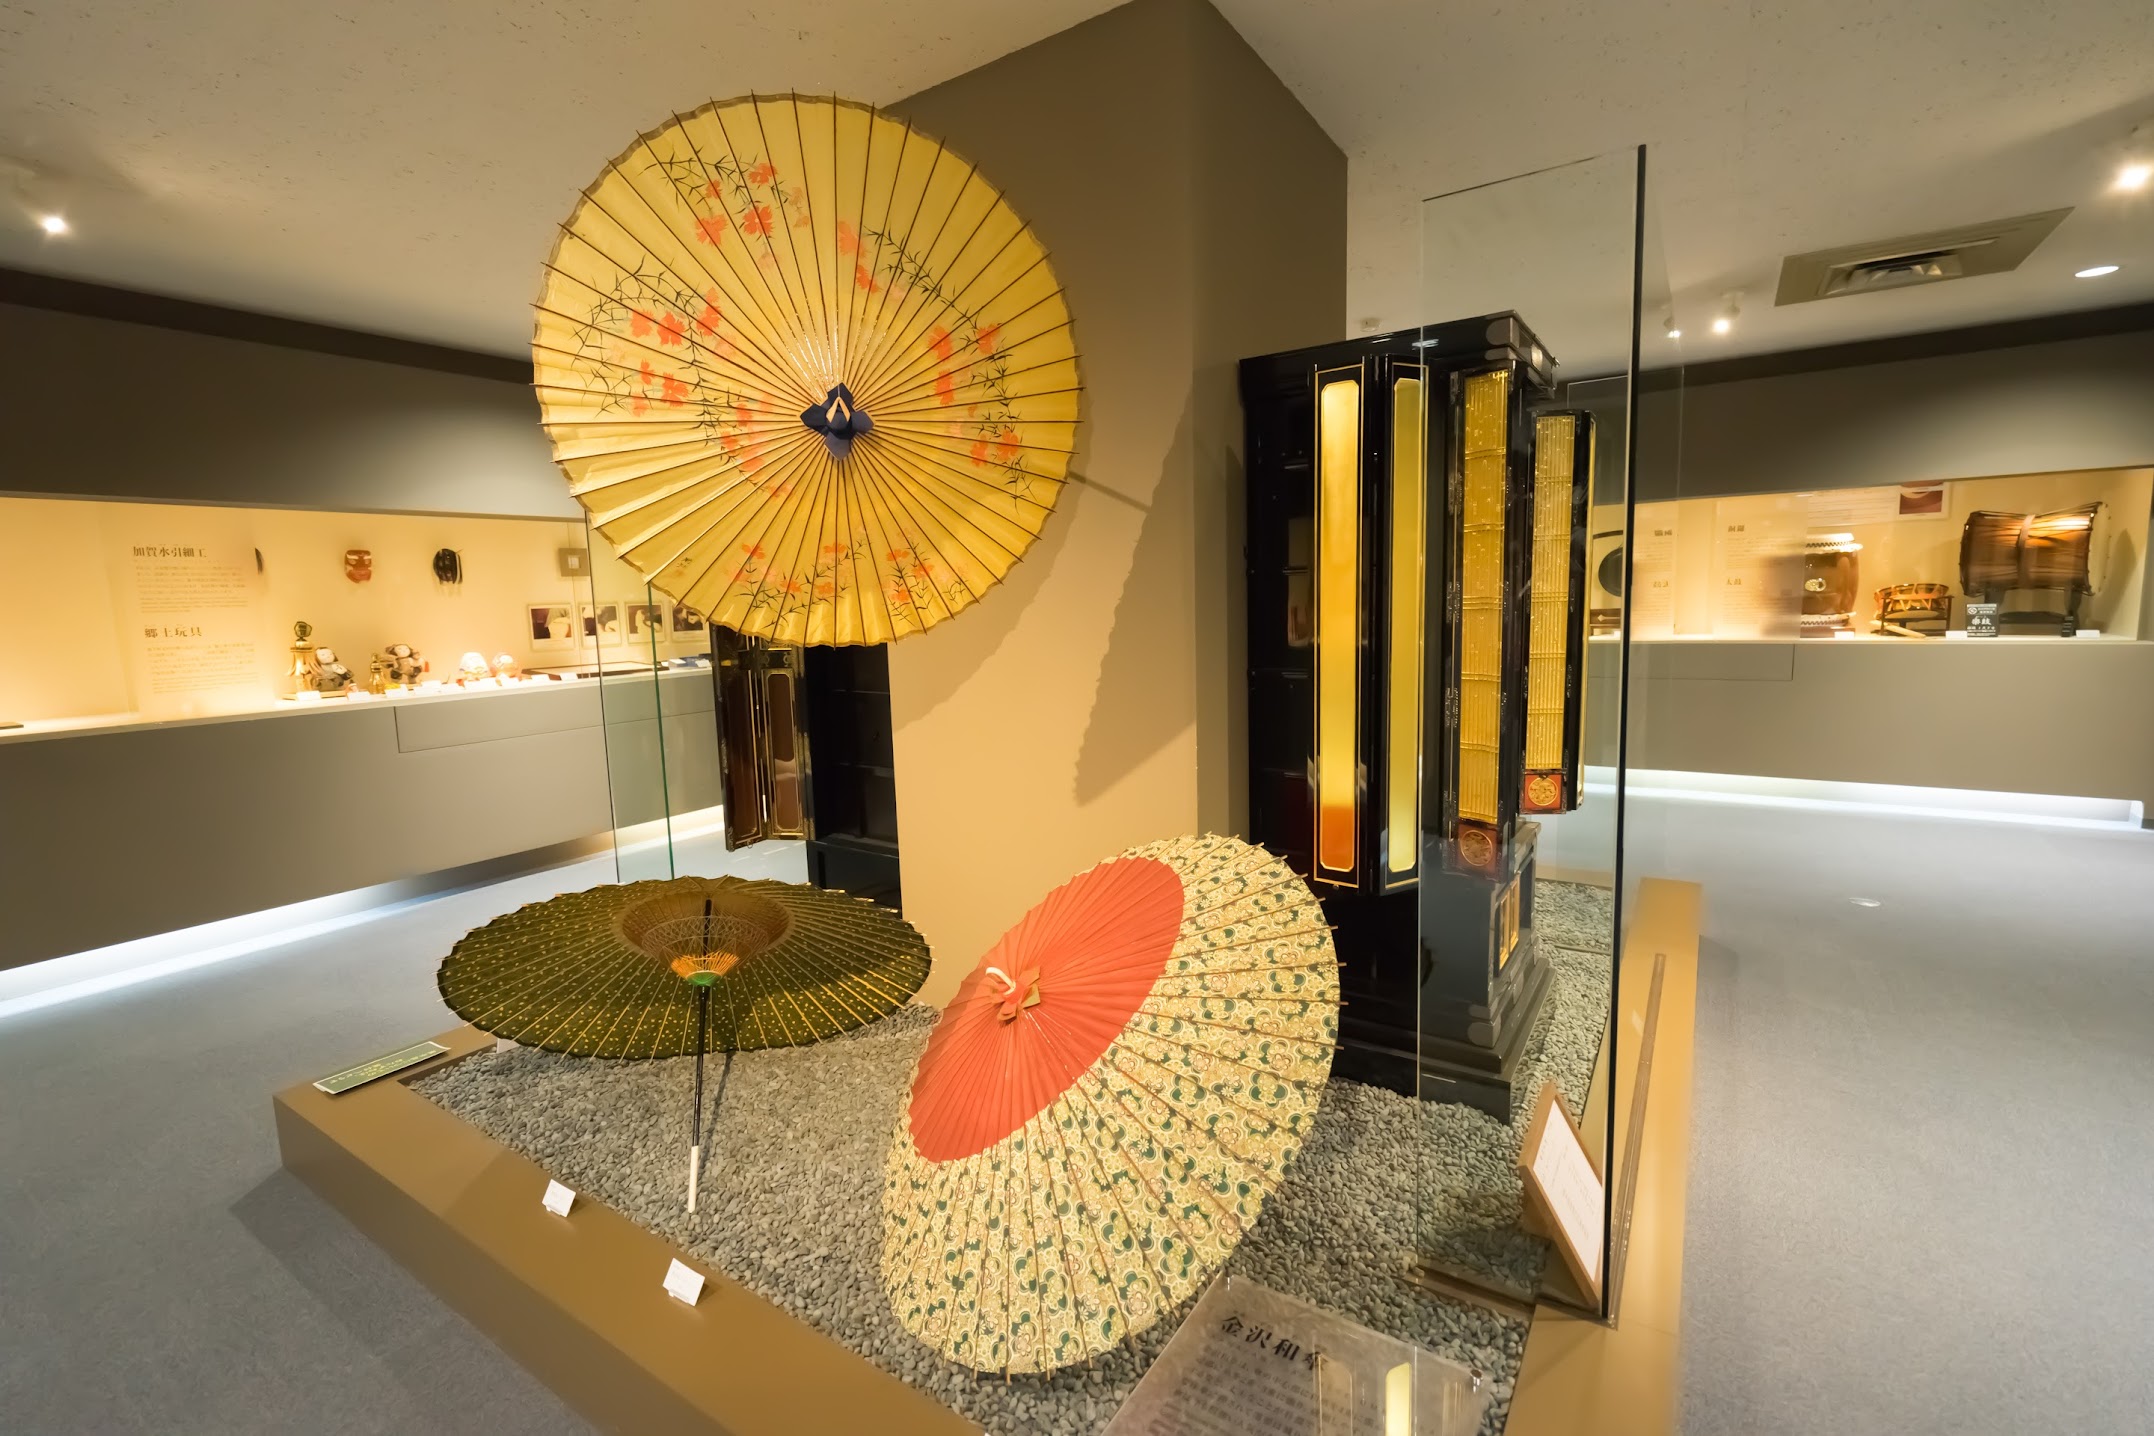 Ishikawa Prefectural Museum of Traditional Arts and Crafts